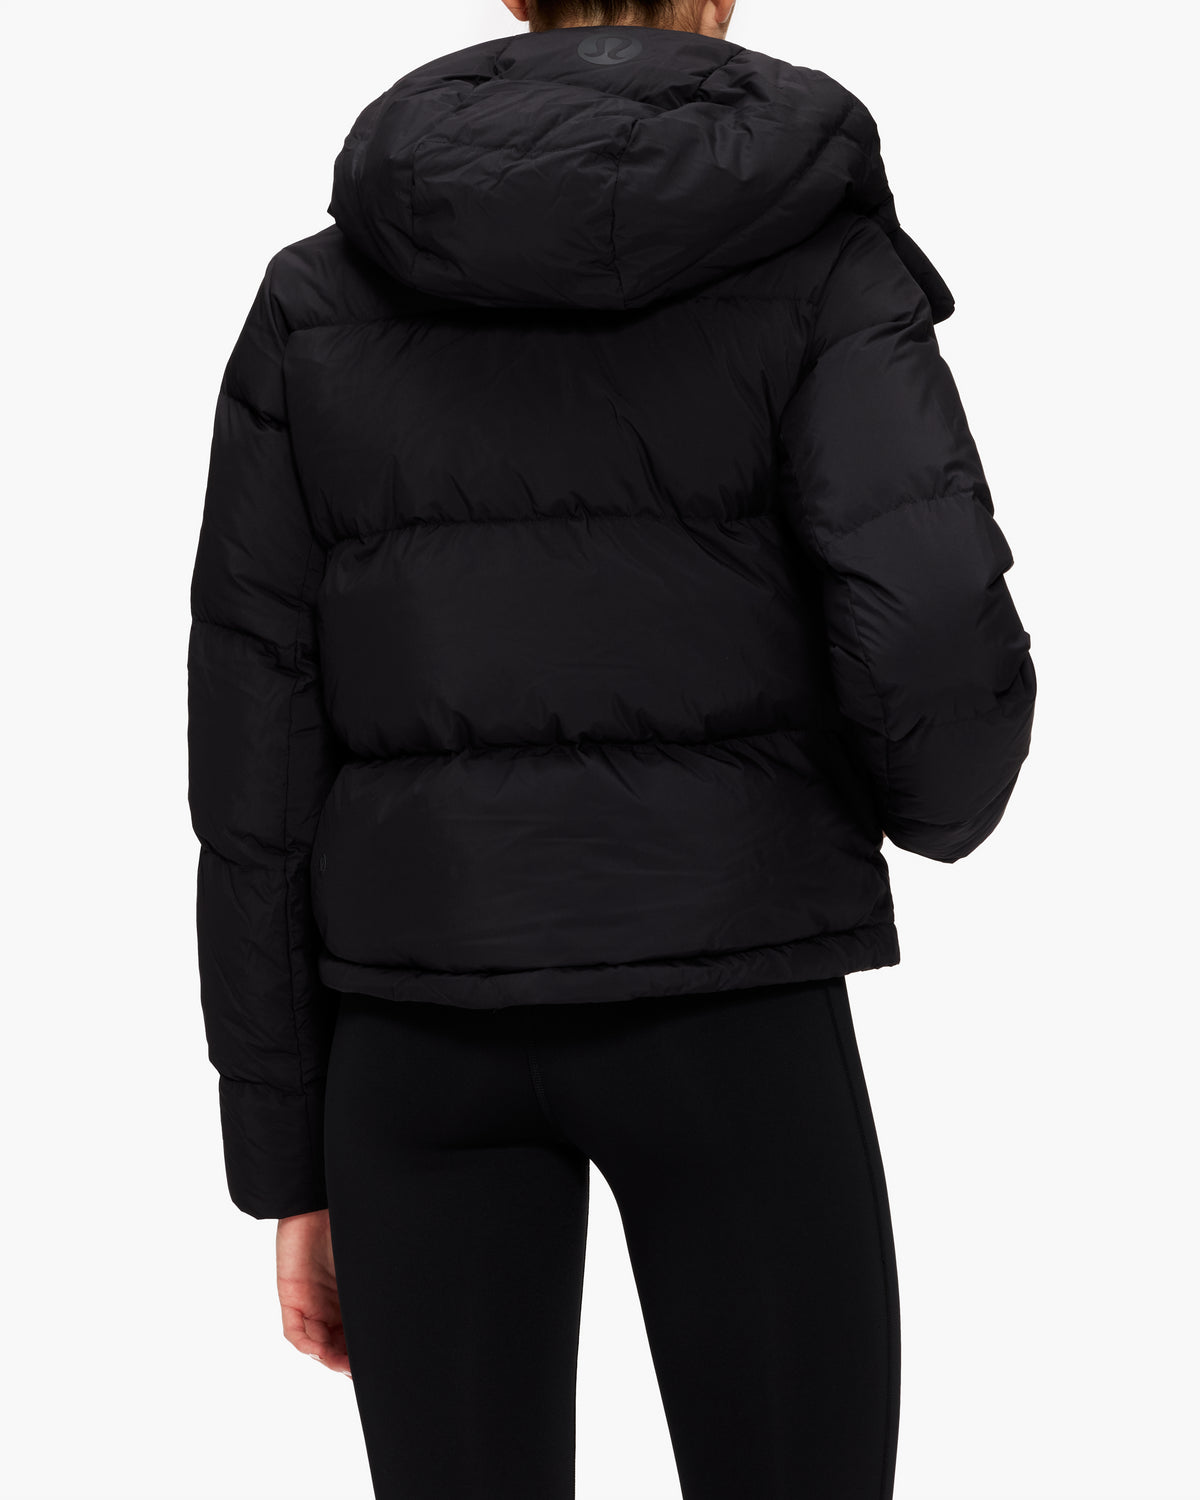 Lululemon WUNDER PUFF Jacket Black Size 2 NWT - Incredibly Warm and Super  Cute